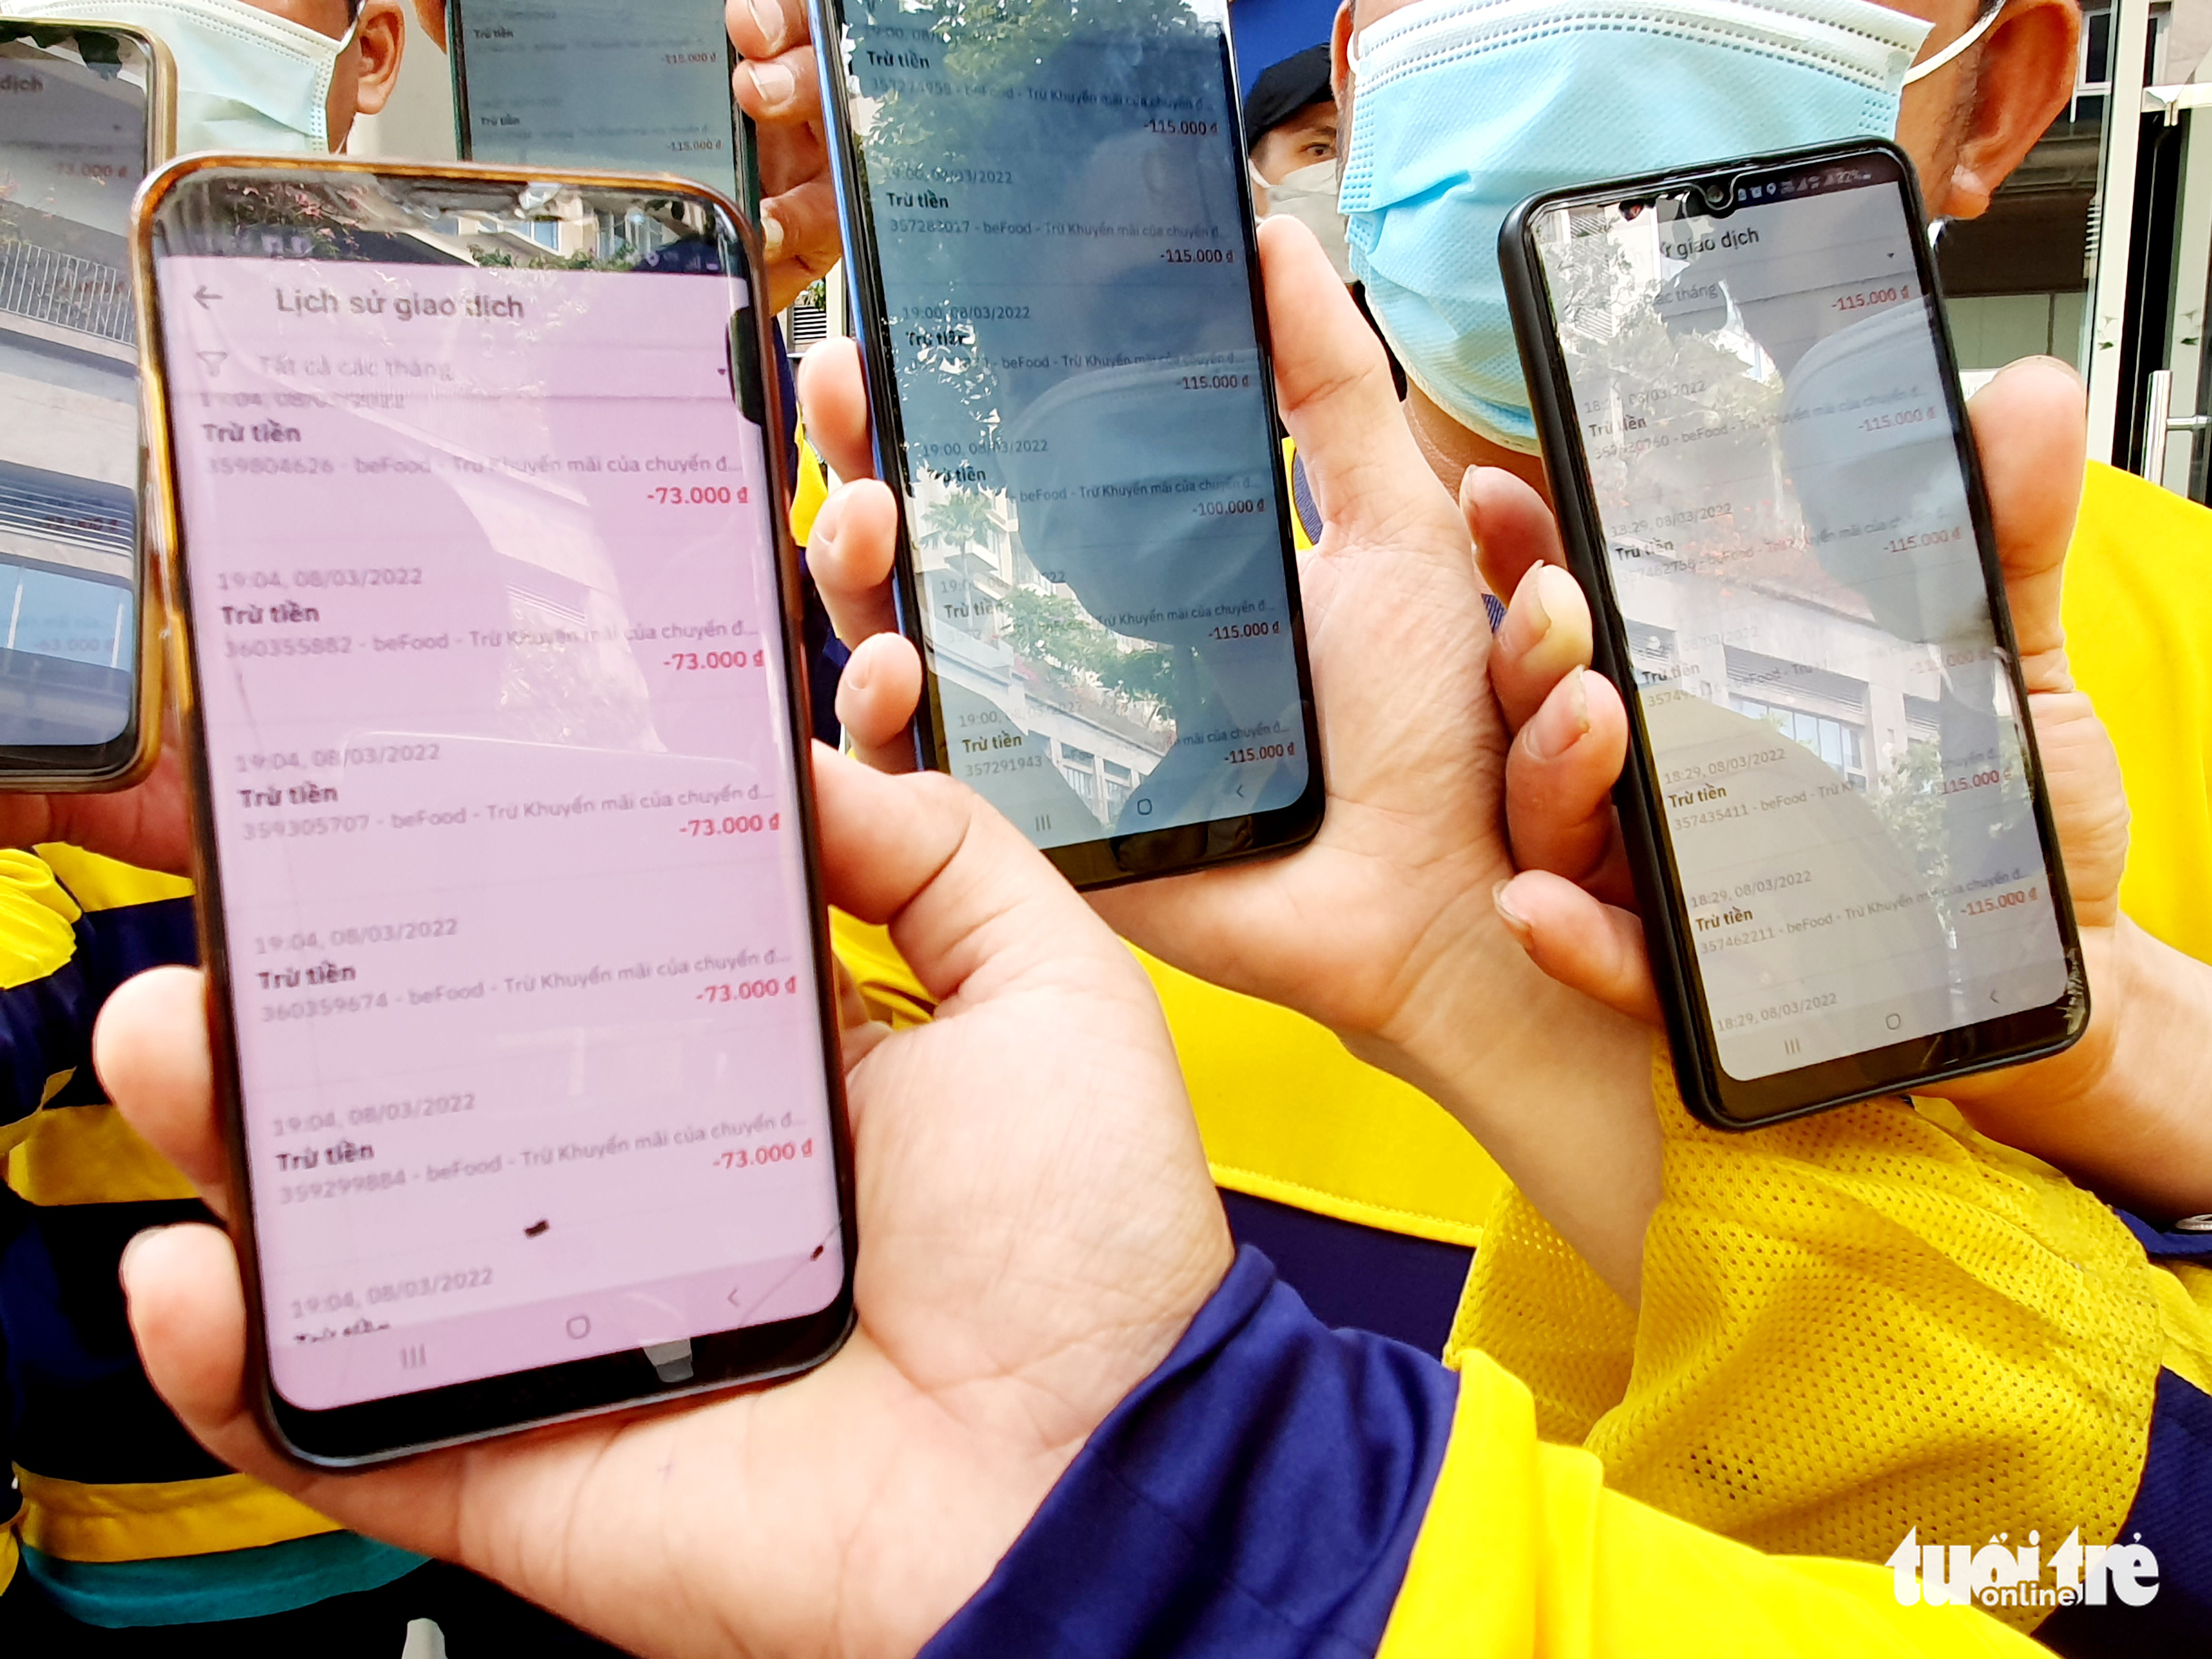 Food delivery partners show notifications of deductions on their partnership account balance in front of Be Group’s headquarters in Thu Duc City, Ho Chi Minh City, March 9, 2022. Photo: Cong Trung / Tuoi Tre